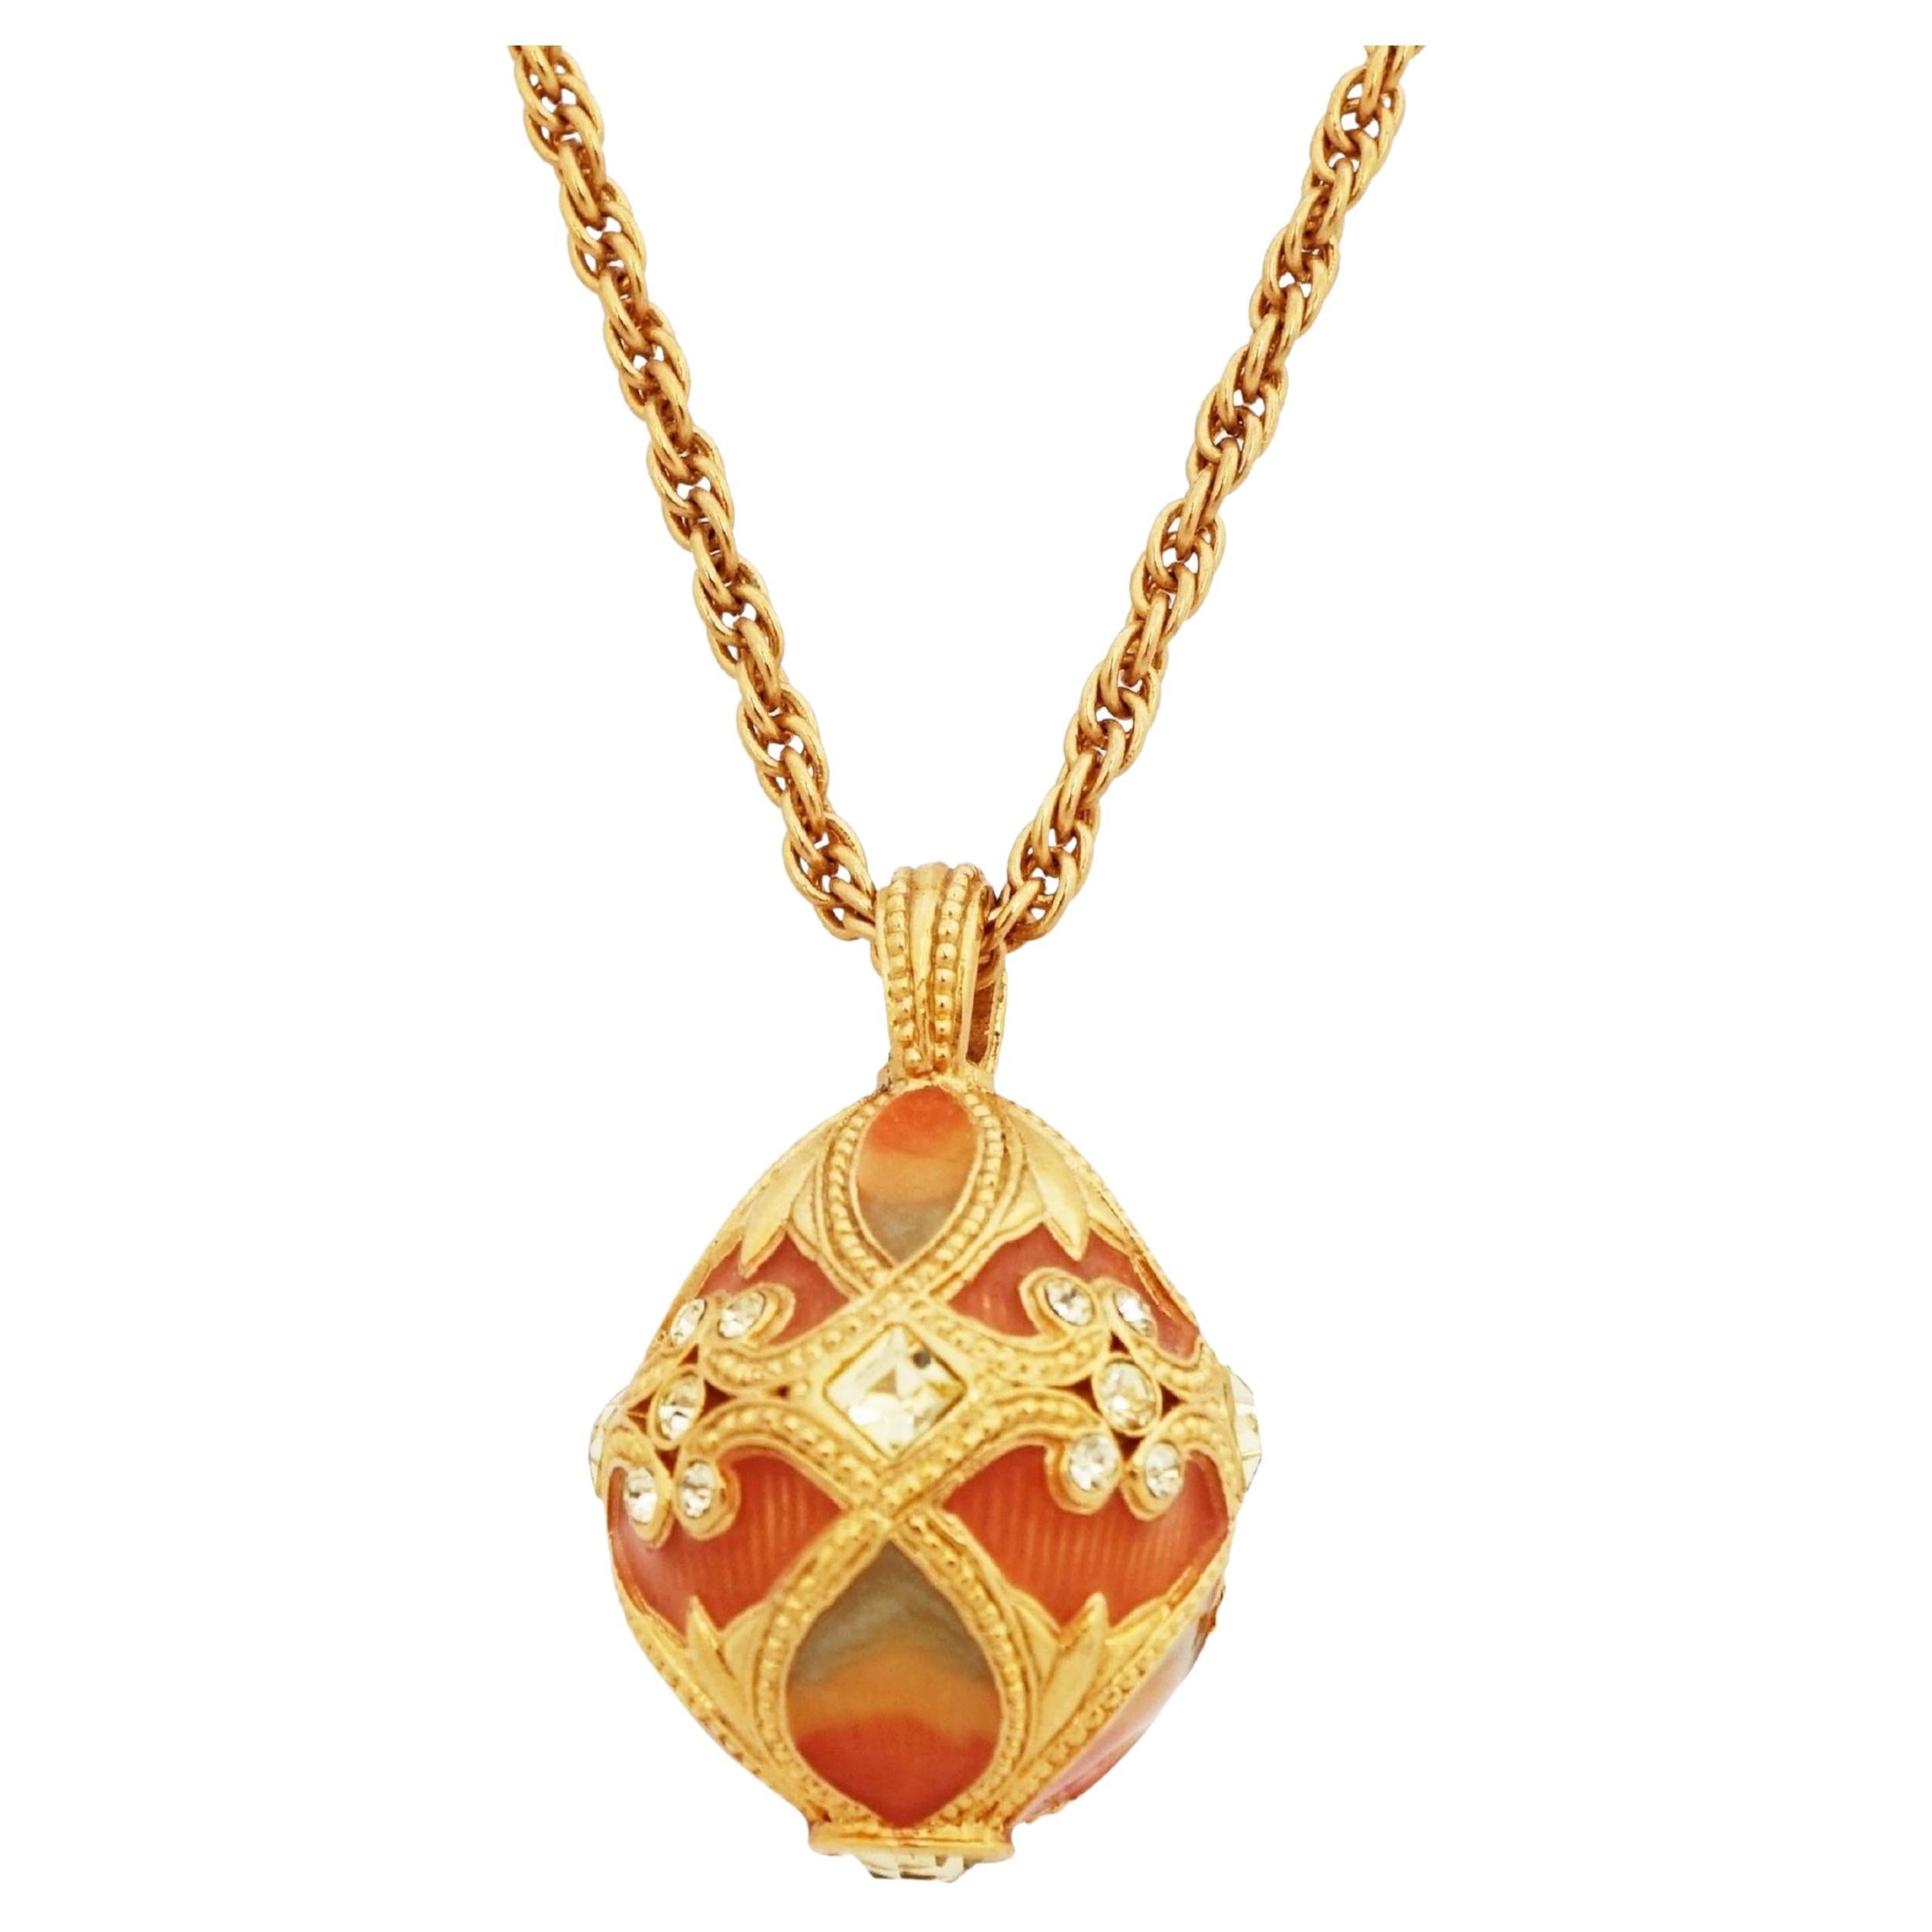 Enameled Egg Pendant Necklace With Rhinestone Accents By Joan Rivers, 1990s